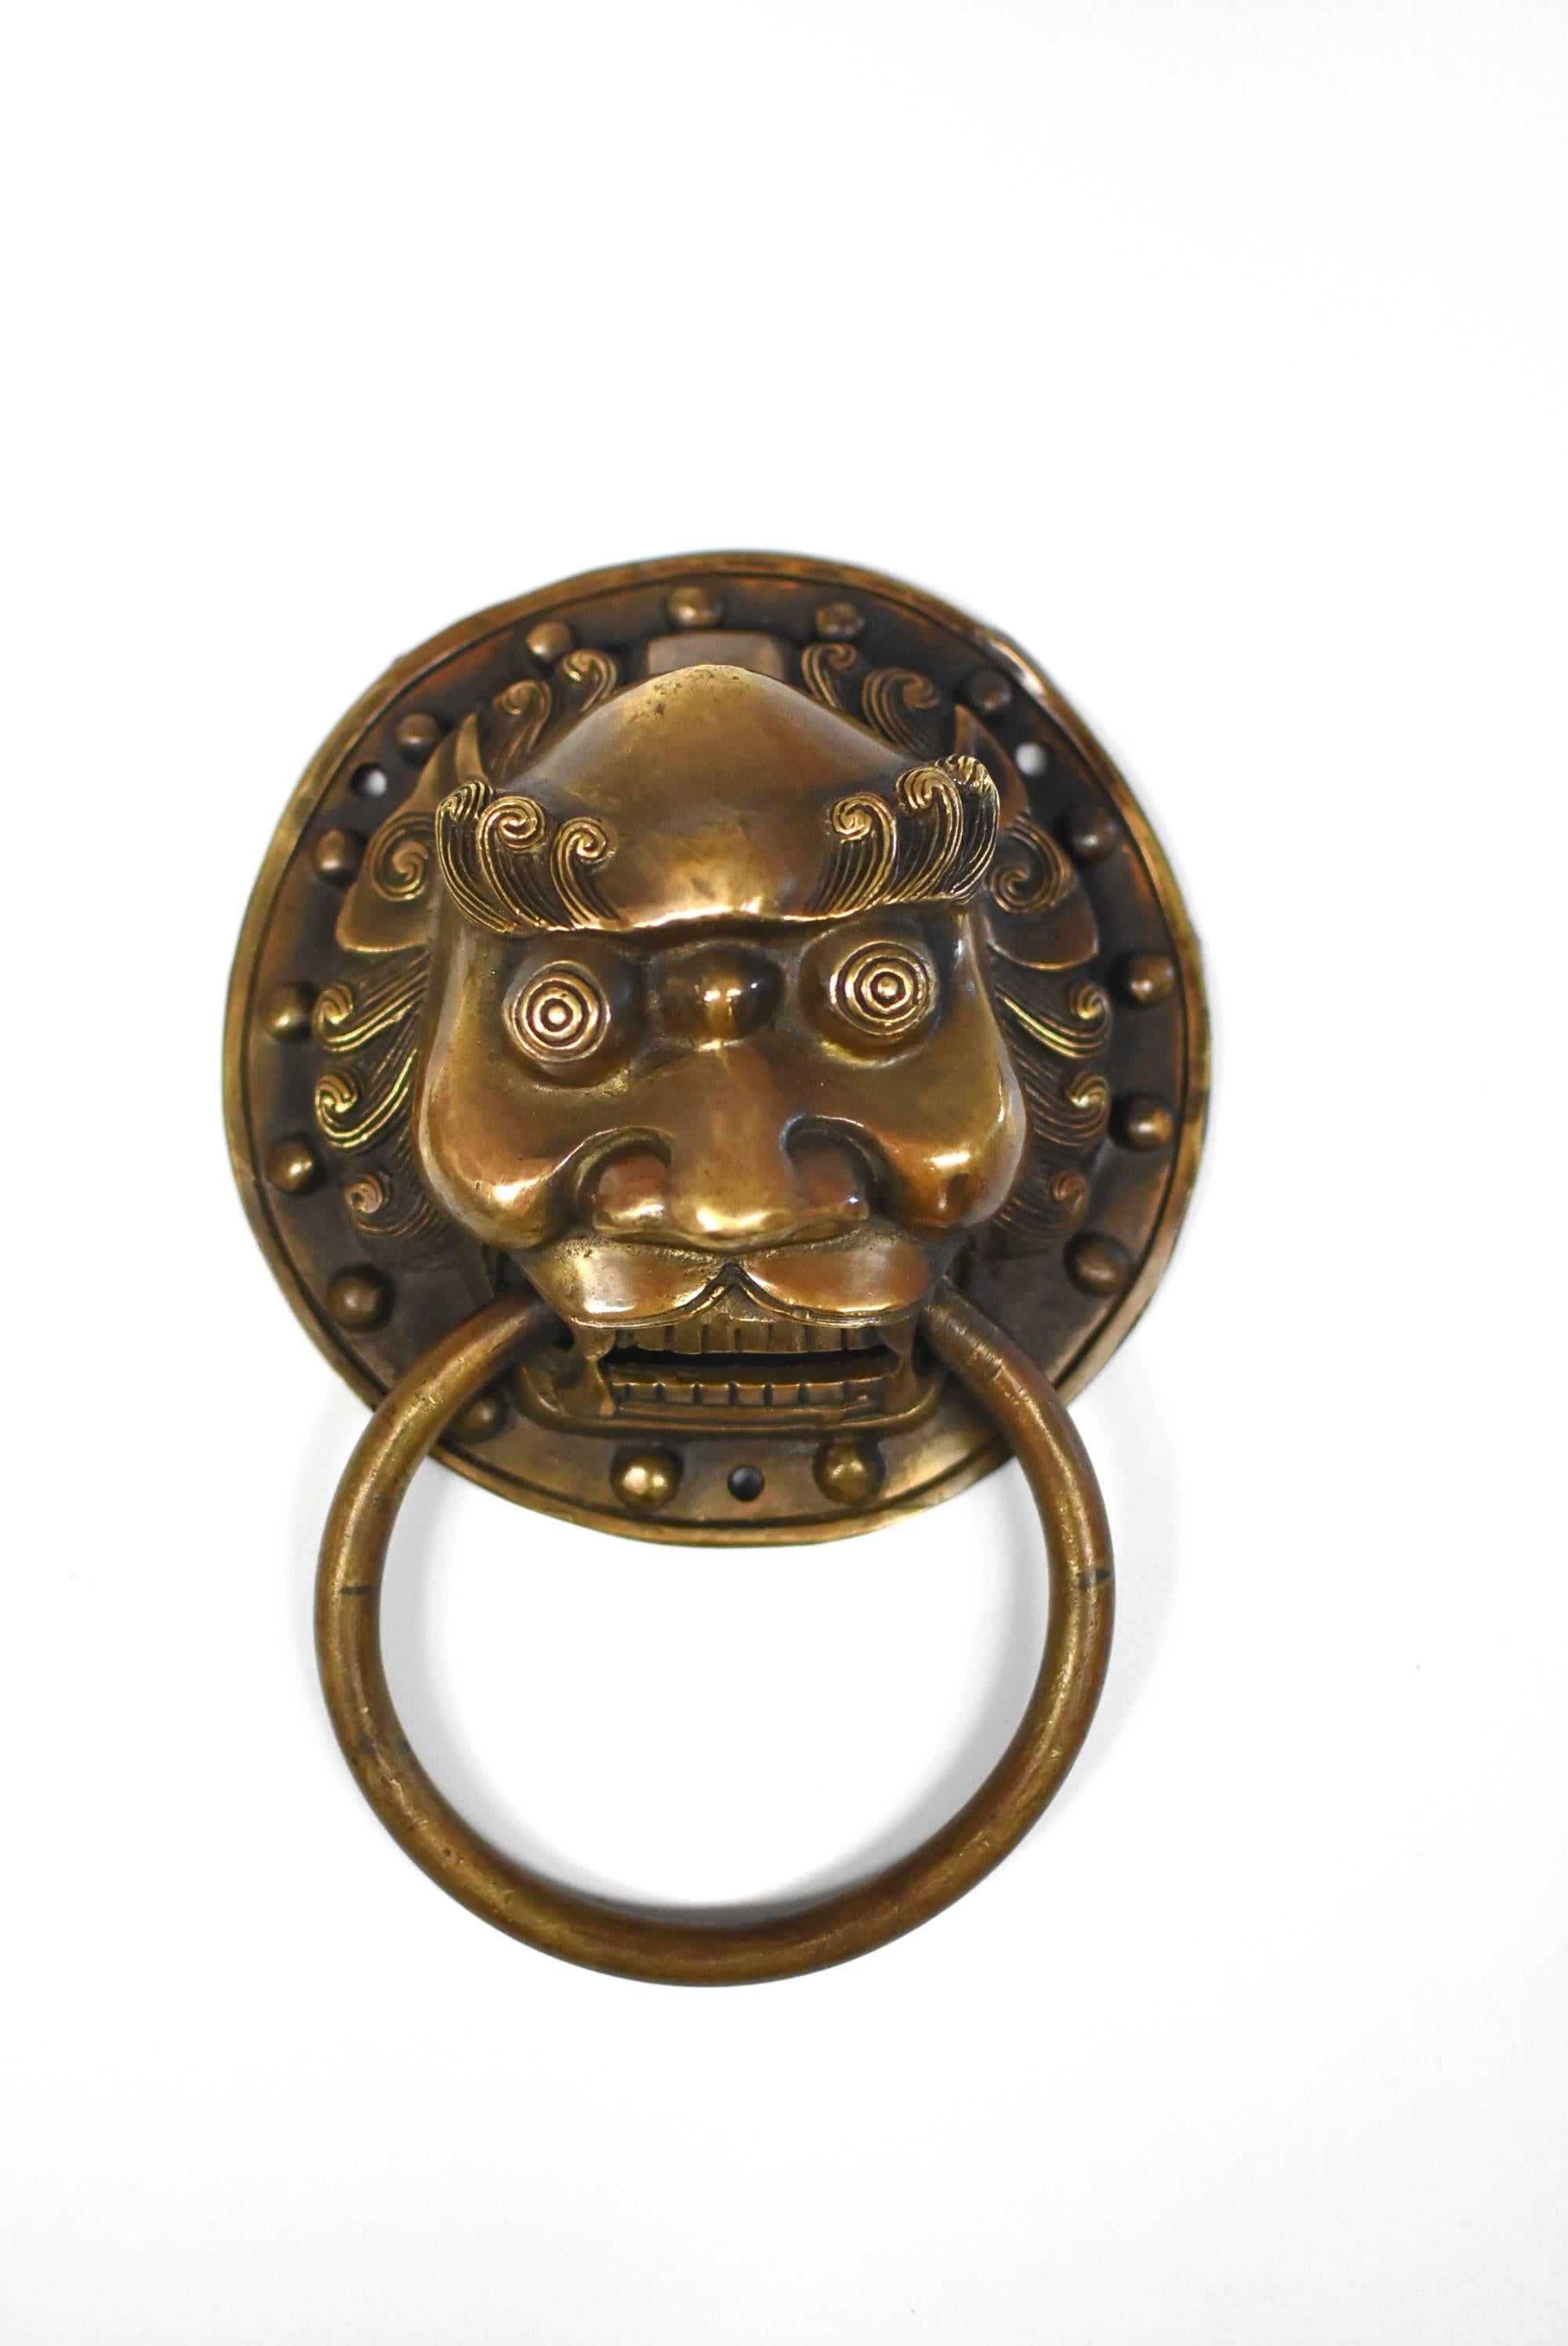 A pair of beautiful bronze warrior motif knockers. The mythical warrior has large bulging eyes above wide open mouth. Curly hair surrounding the face, repeated in the eye brows which flanks the prominent forehead. Heavy cheekbones echoes the